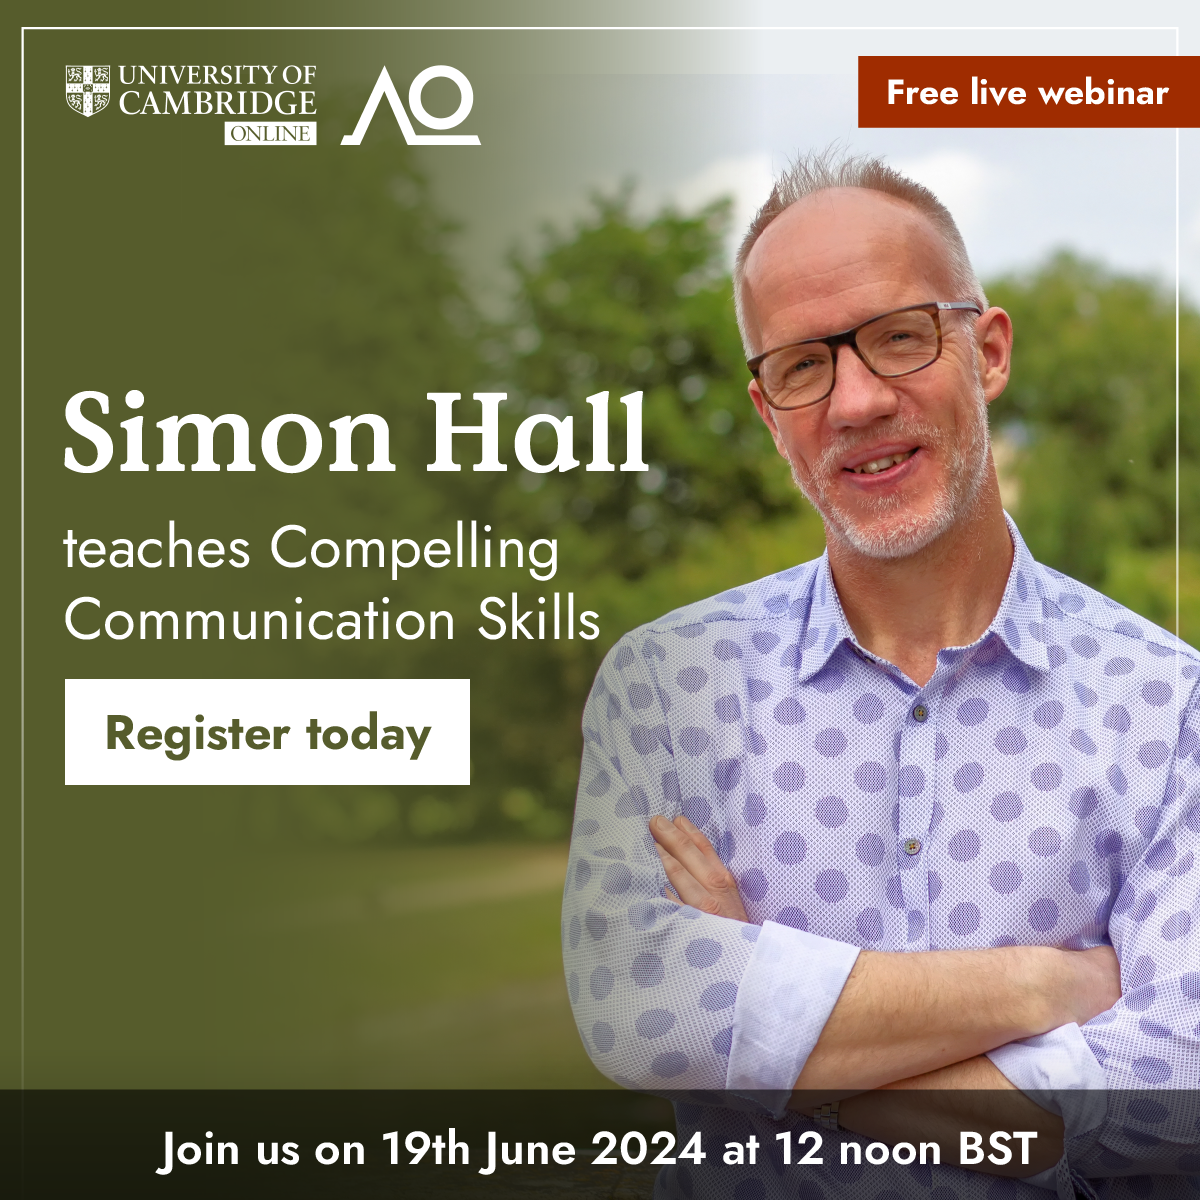 Simon Hall teaches Compelling Communication Skills. Join us on 19 June at midday BST.